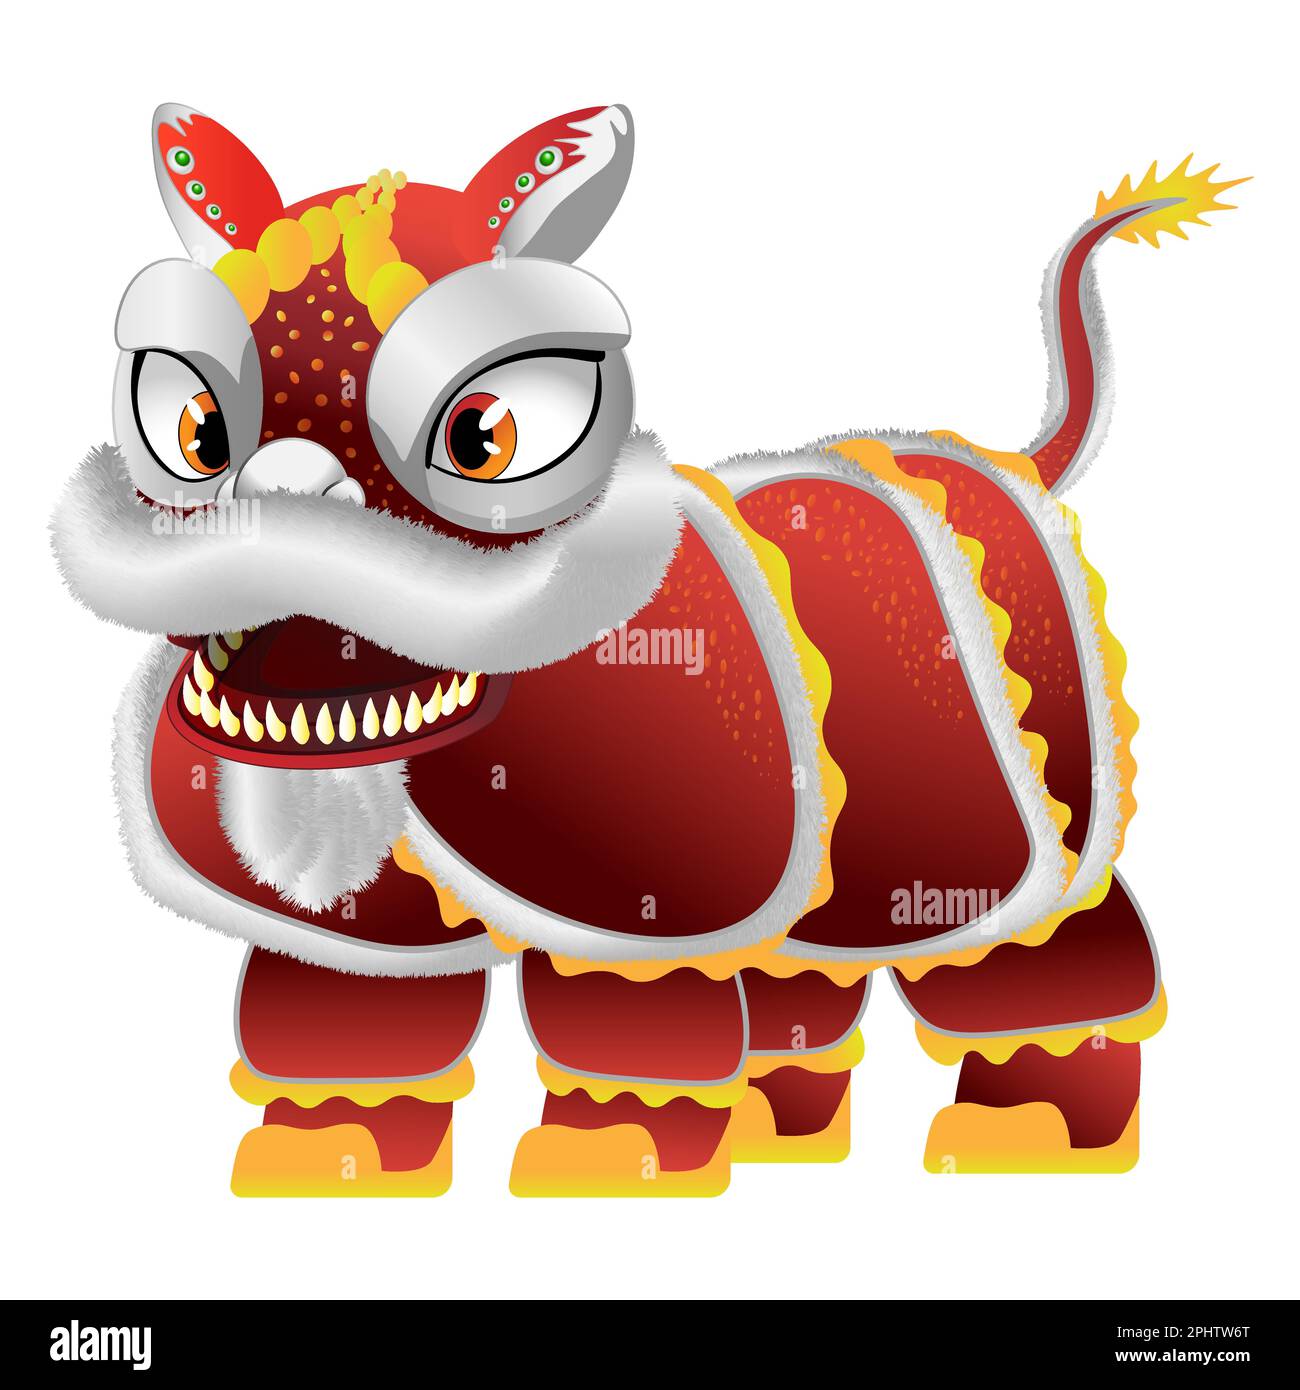 Chinese new year guardian lion. Colorful vector illustration isolated on white background. Stock Vector